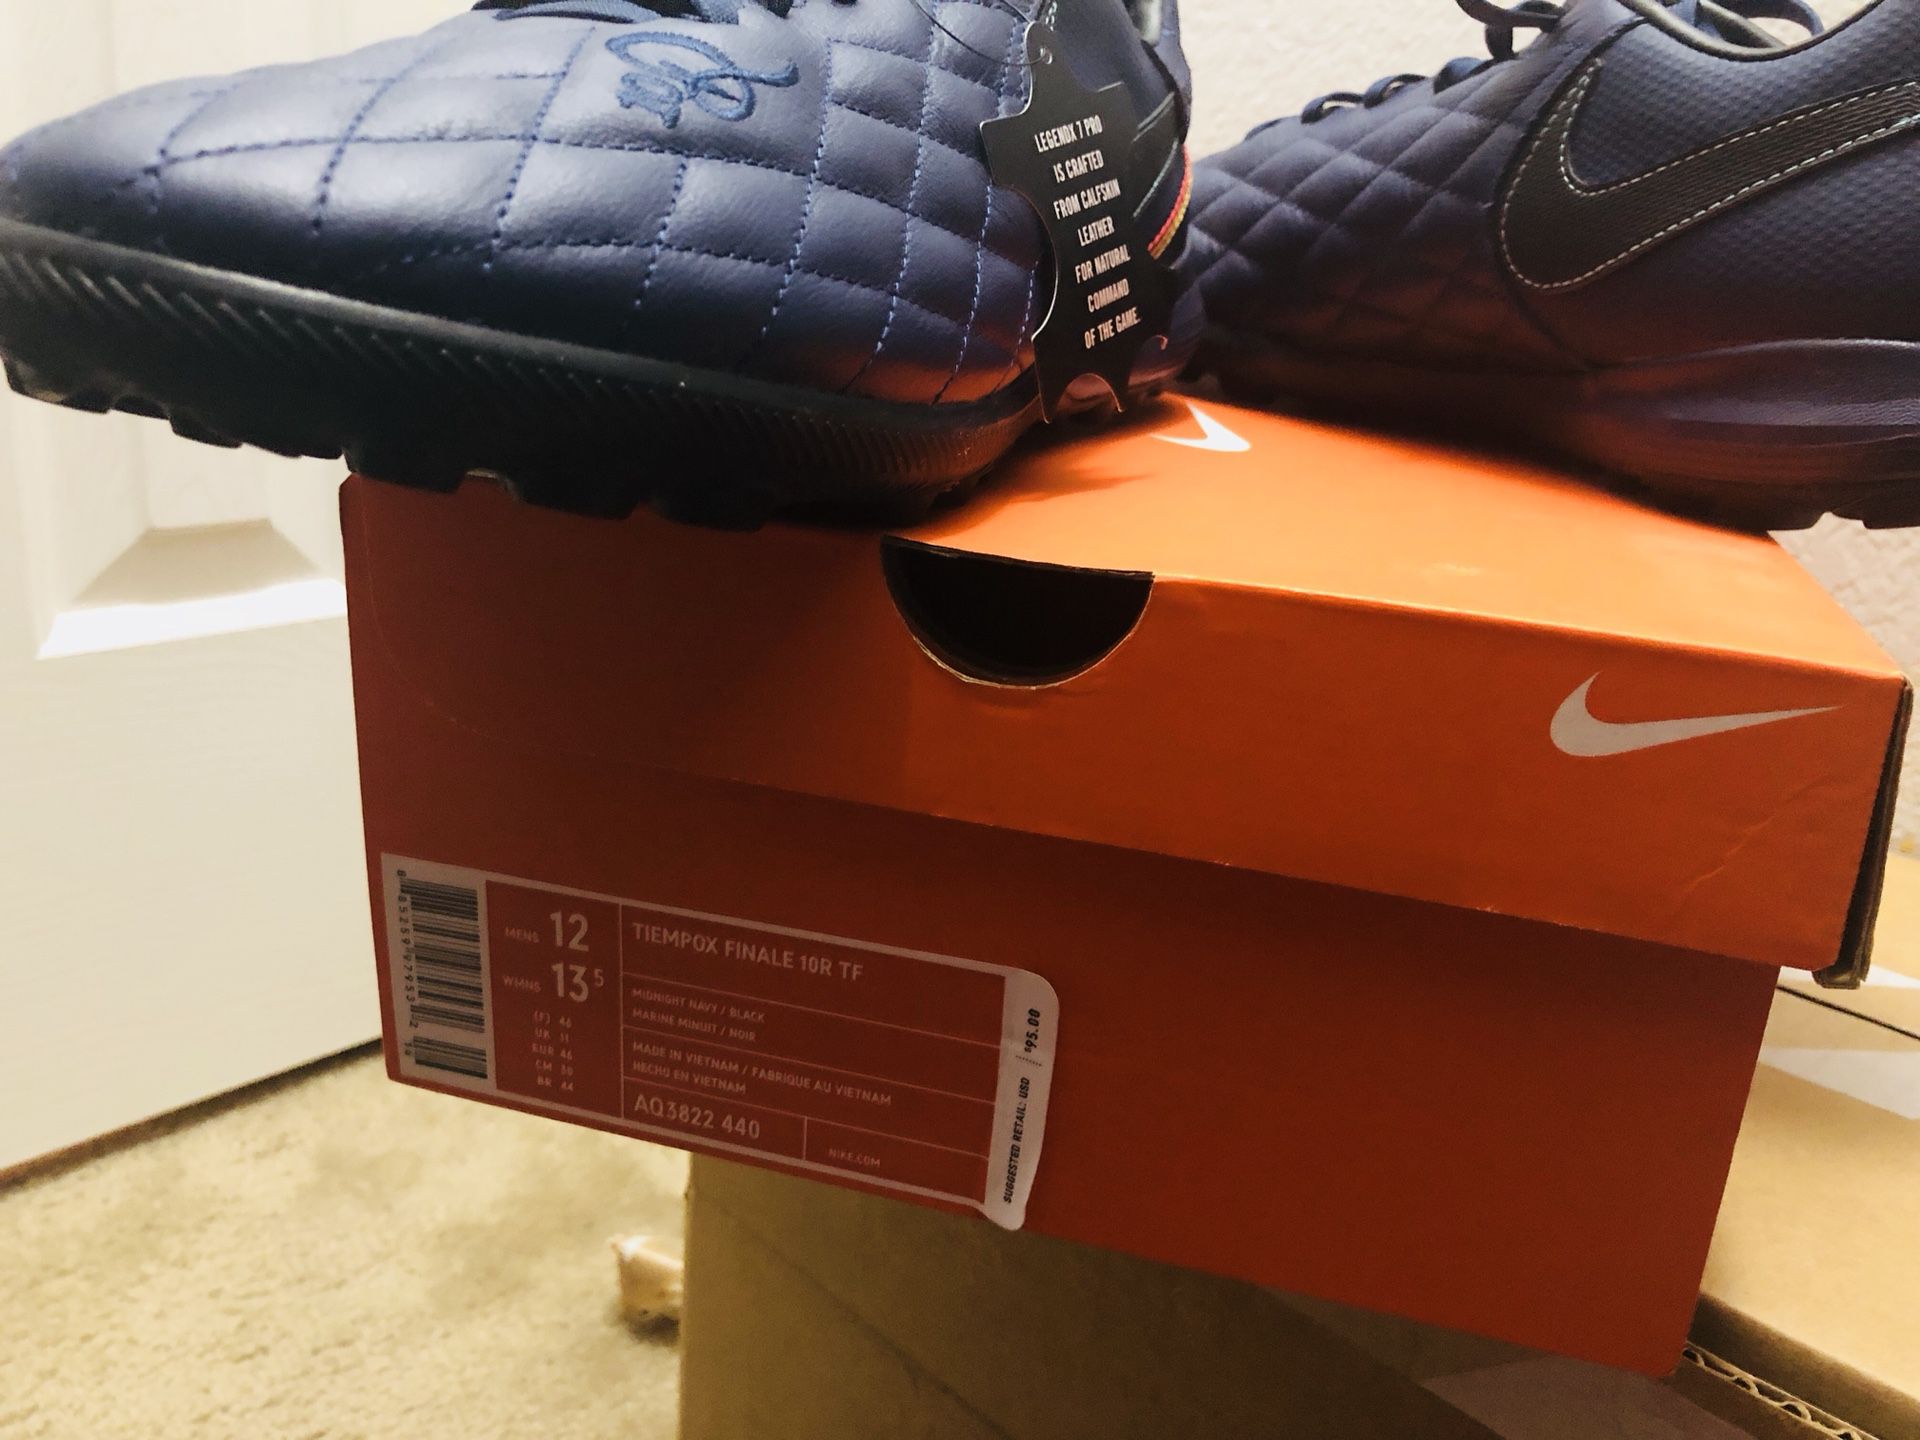 Nike Tiempo X Finale 10R TF (AQ3822-440) Soccer Boots Shoes Ronaldinho size for in Lancaster, TX - OfferUp